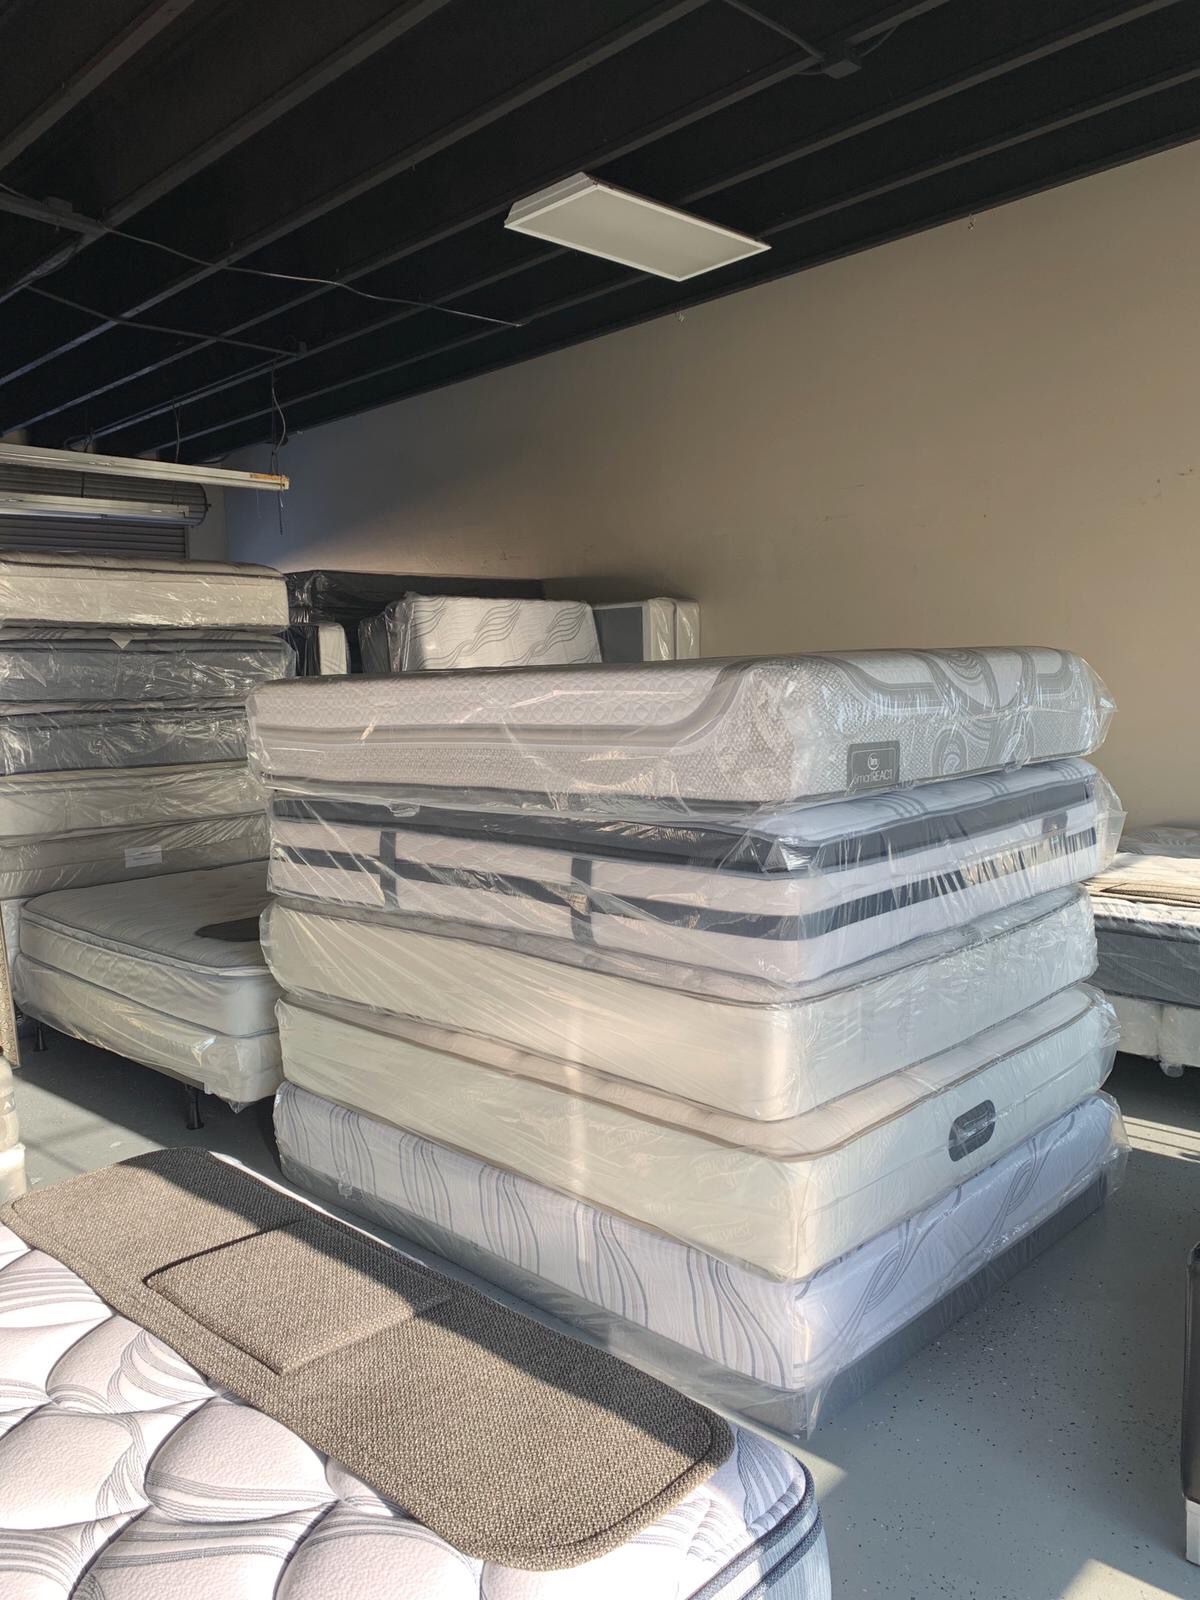 MATTRESSES SALE GOING ON NOW. ALL BEDS NEW WRAPPED IN PLASTIC!!